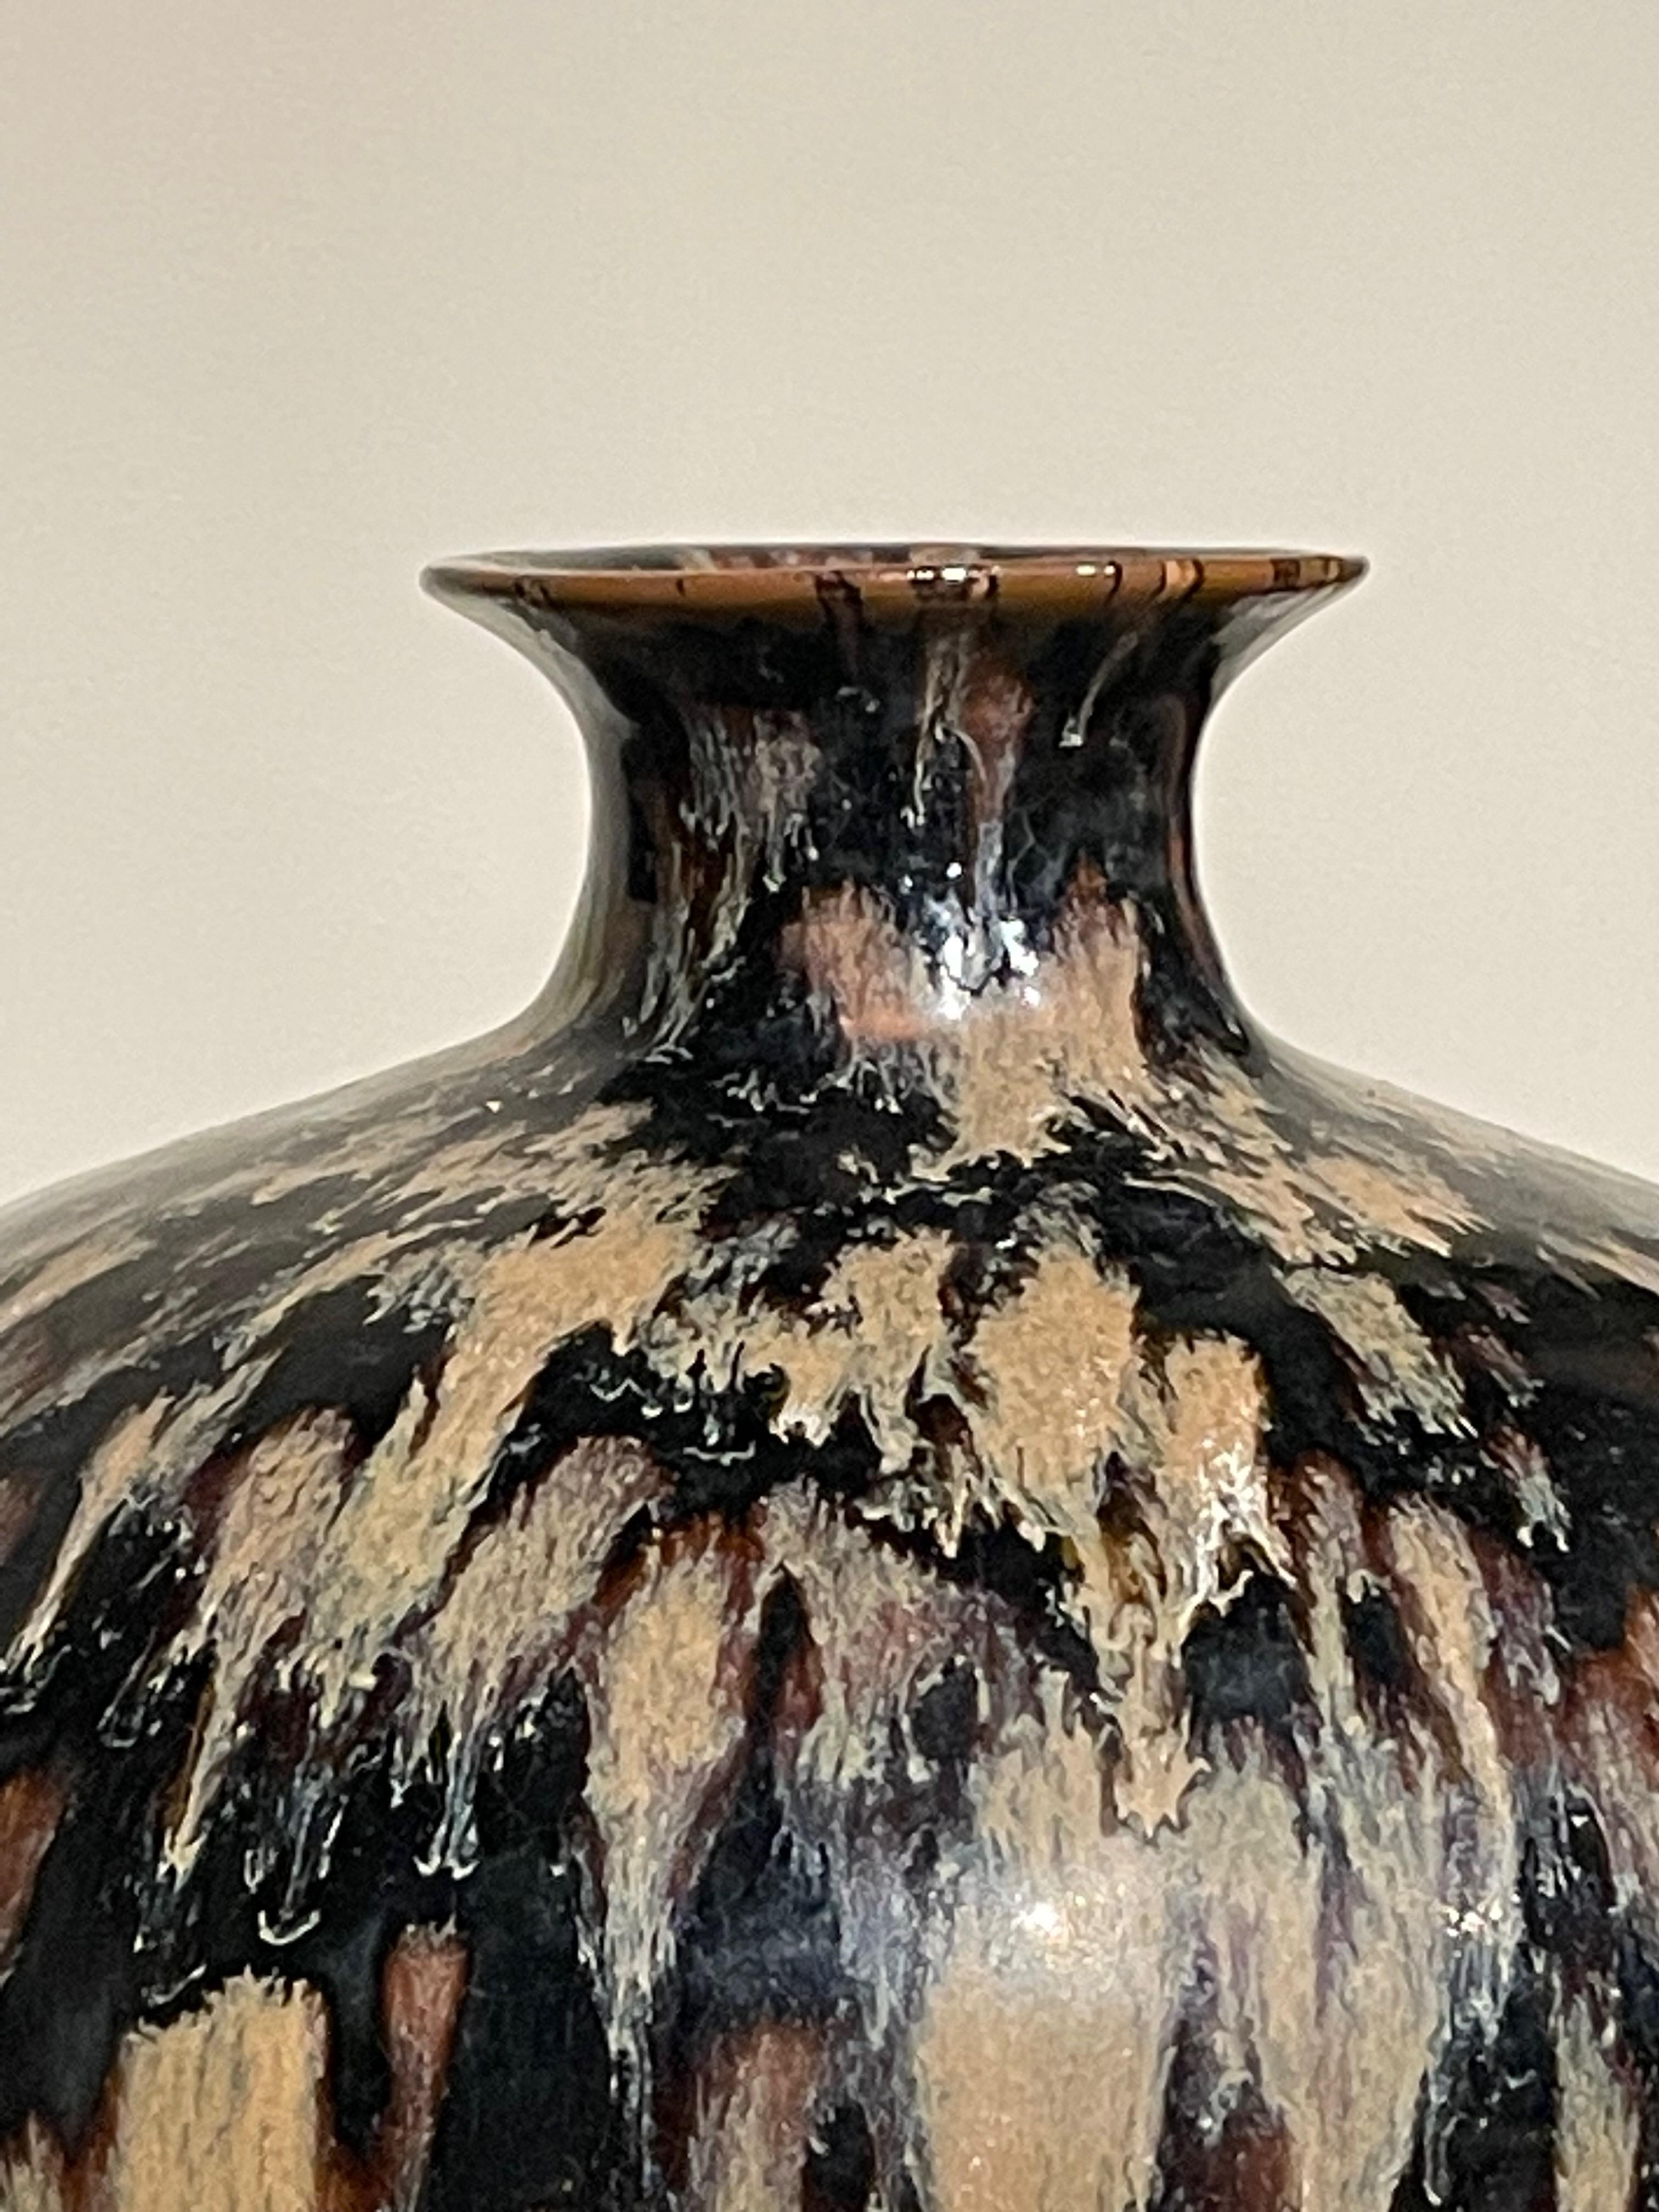 Contemporary Chinese black and cream splatter designed glaze vase.
Short, squat shape.
Two available.
Taller style also available ( S6313 ).
